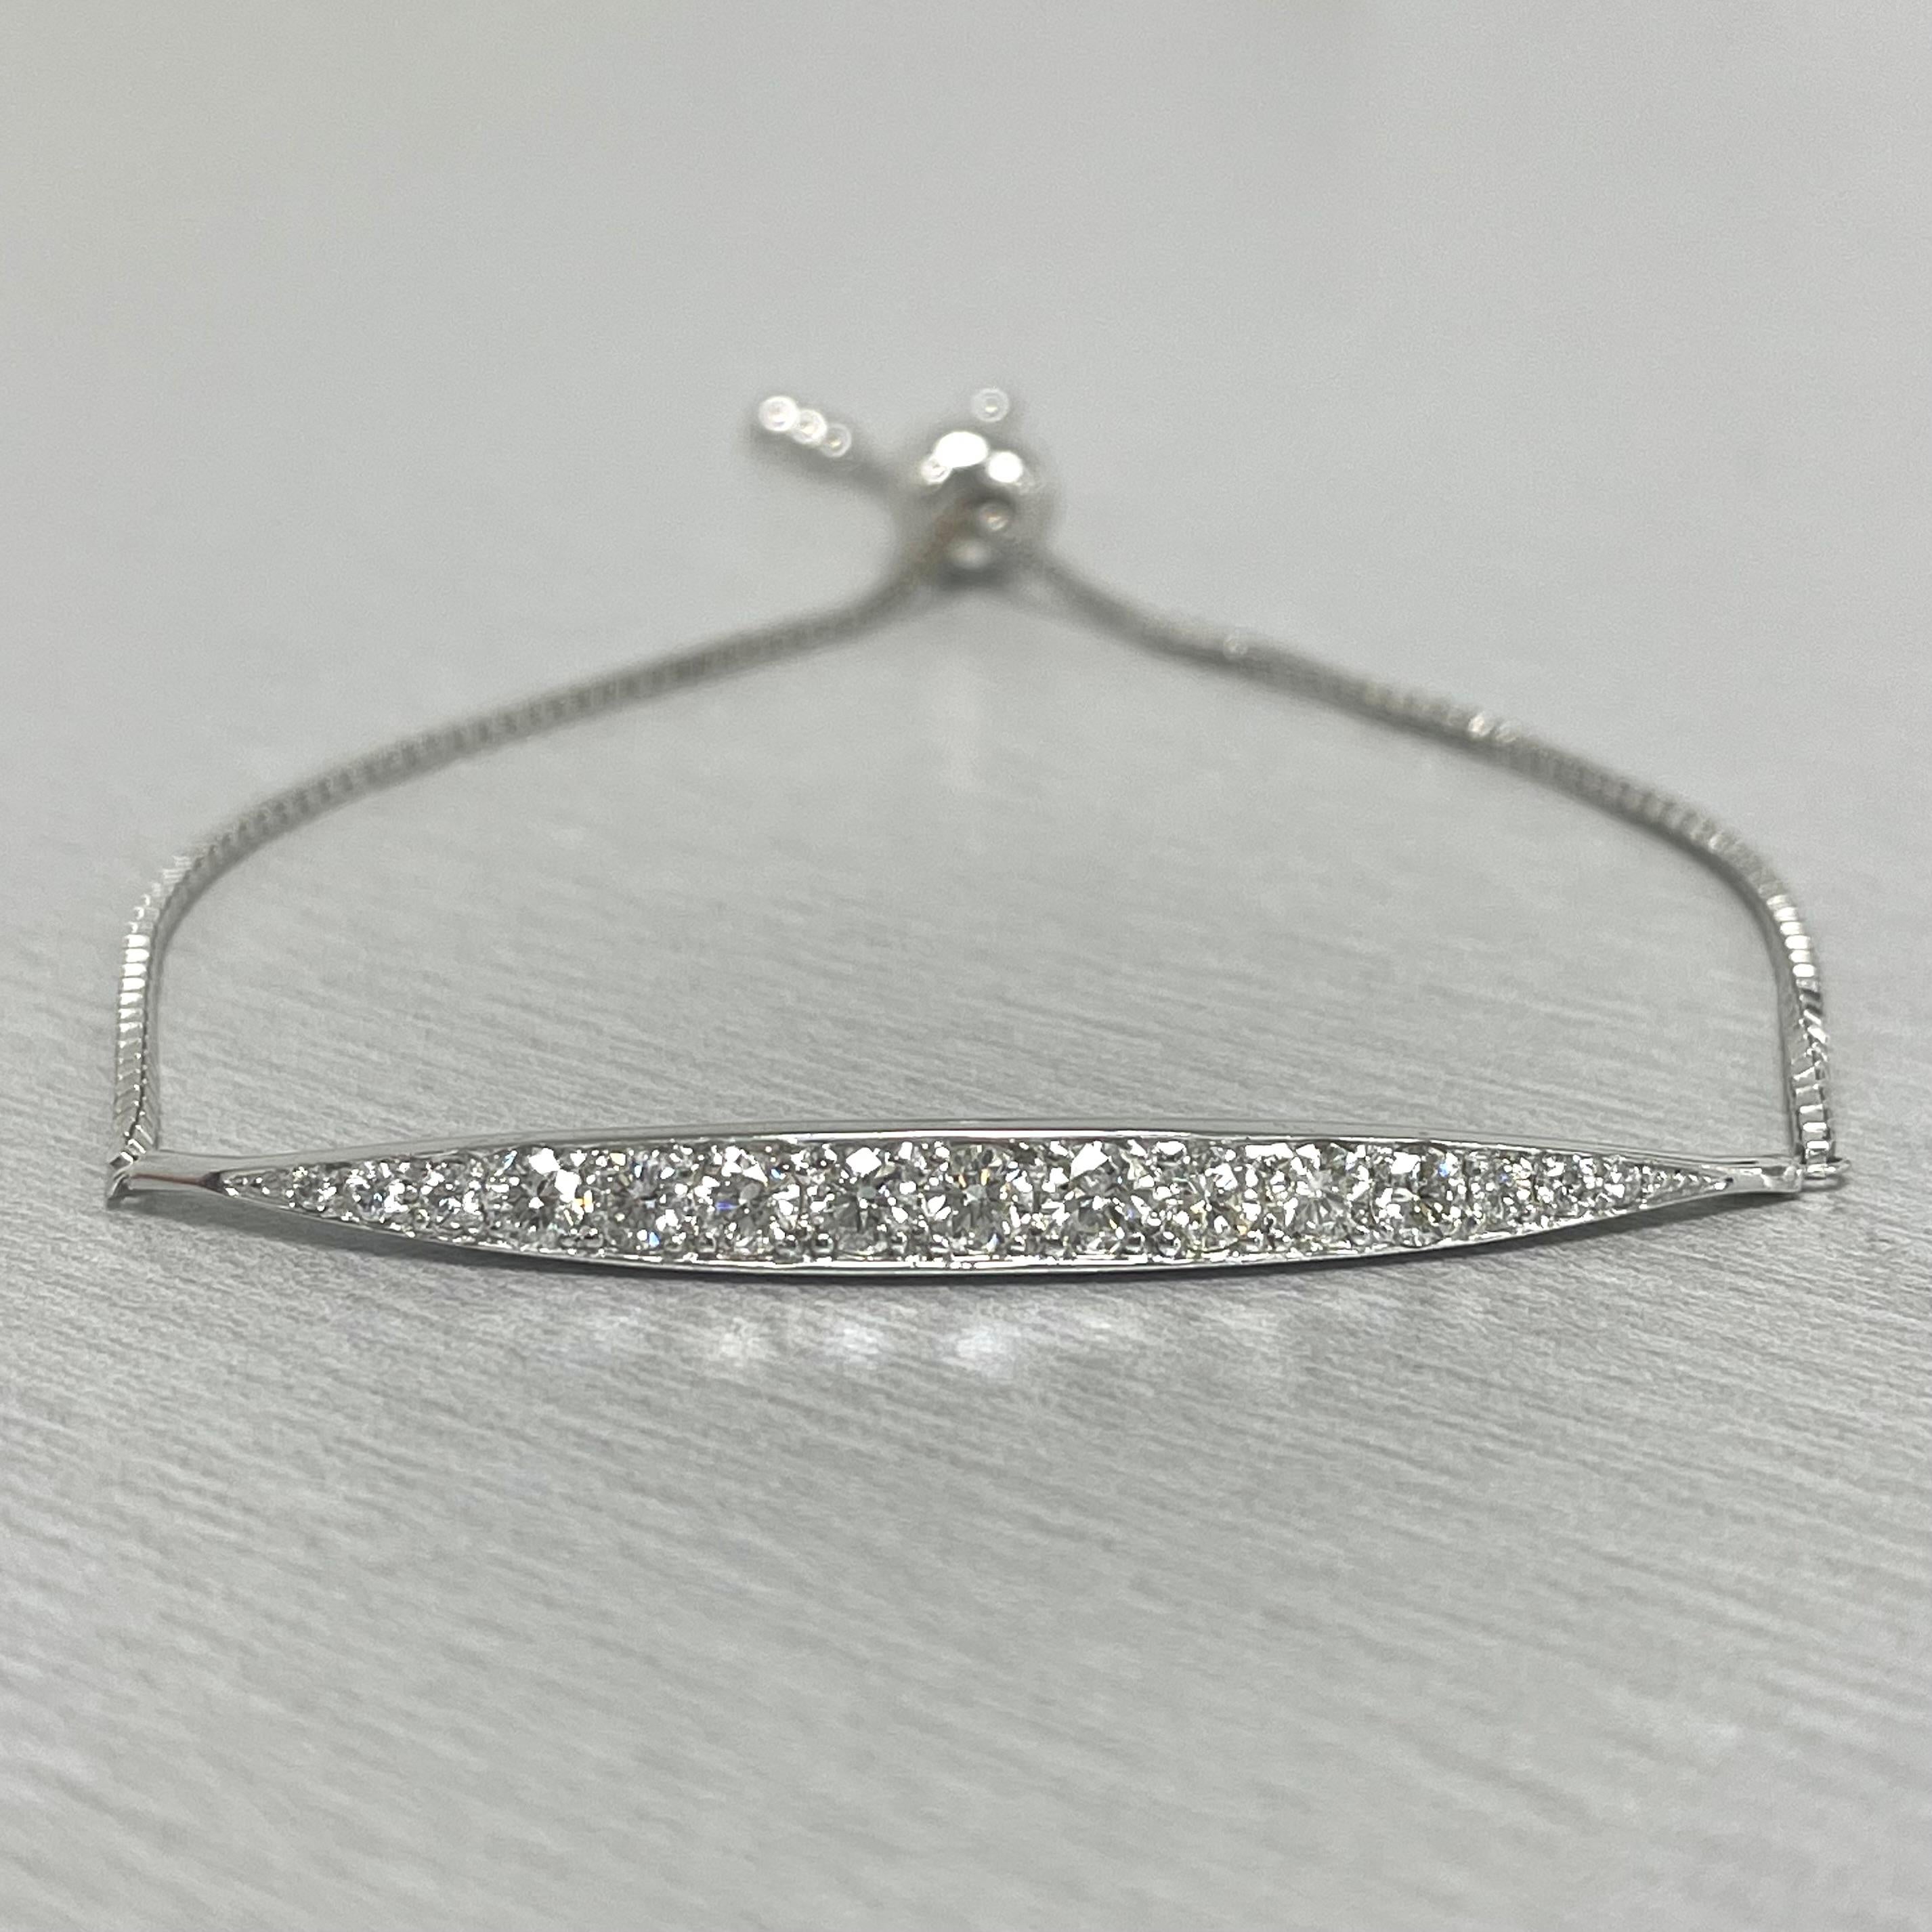 Beauvince Bolo Diamond Bar Bracelet '0.96 Ct Diamonds' in White Gold In New Condition For Sale In New York, NY